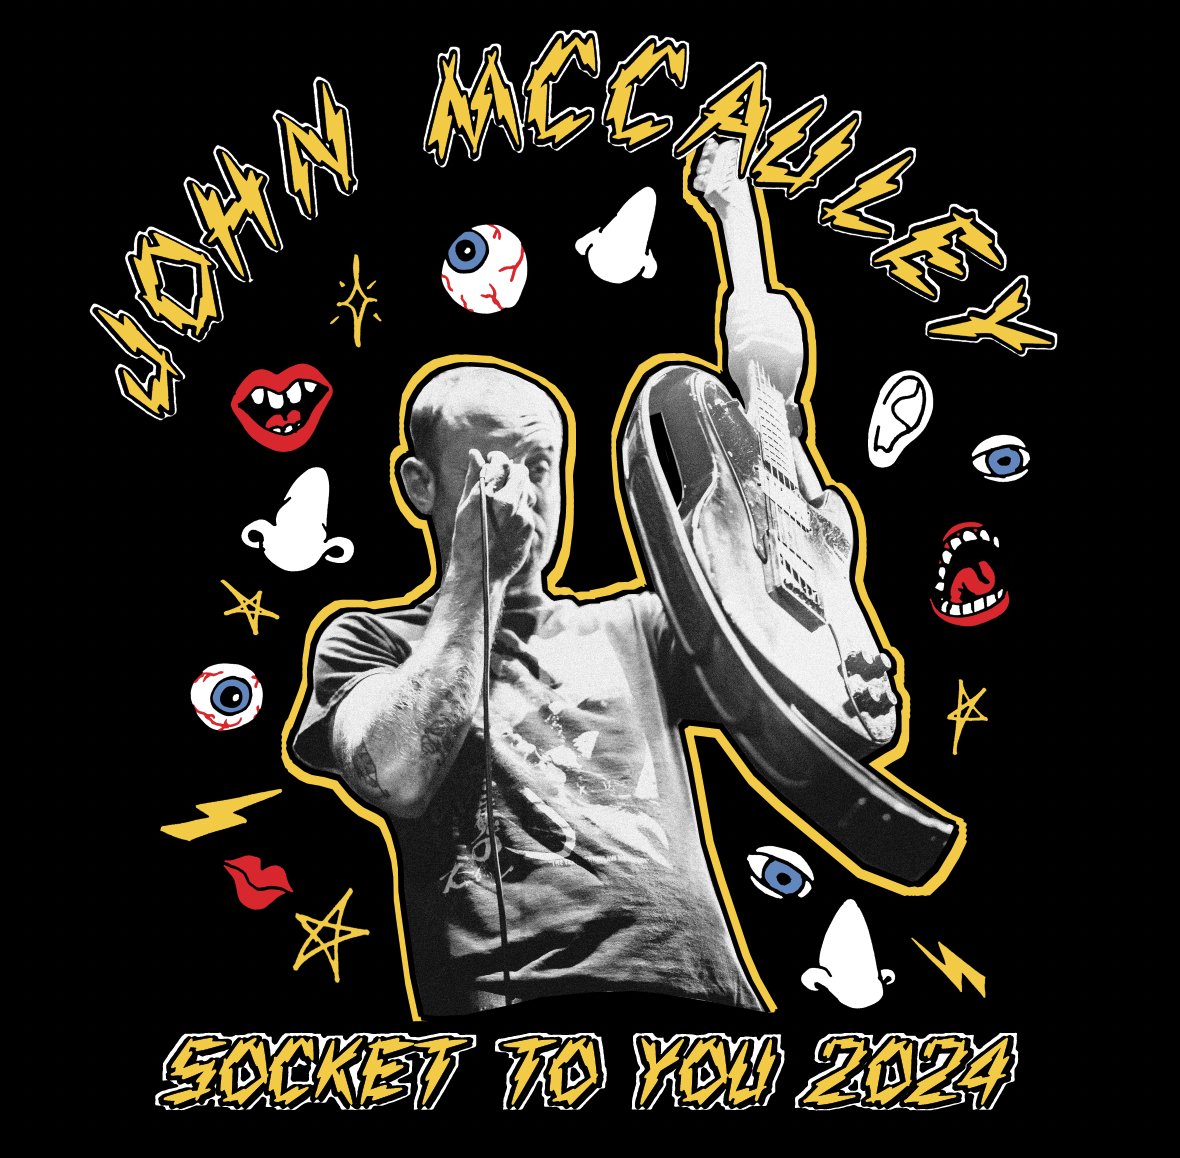 John McCauley’s solo shows start up again next Friday in Milwaukee - grab your tickets now: 10atoms.com/DTtour